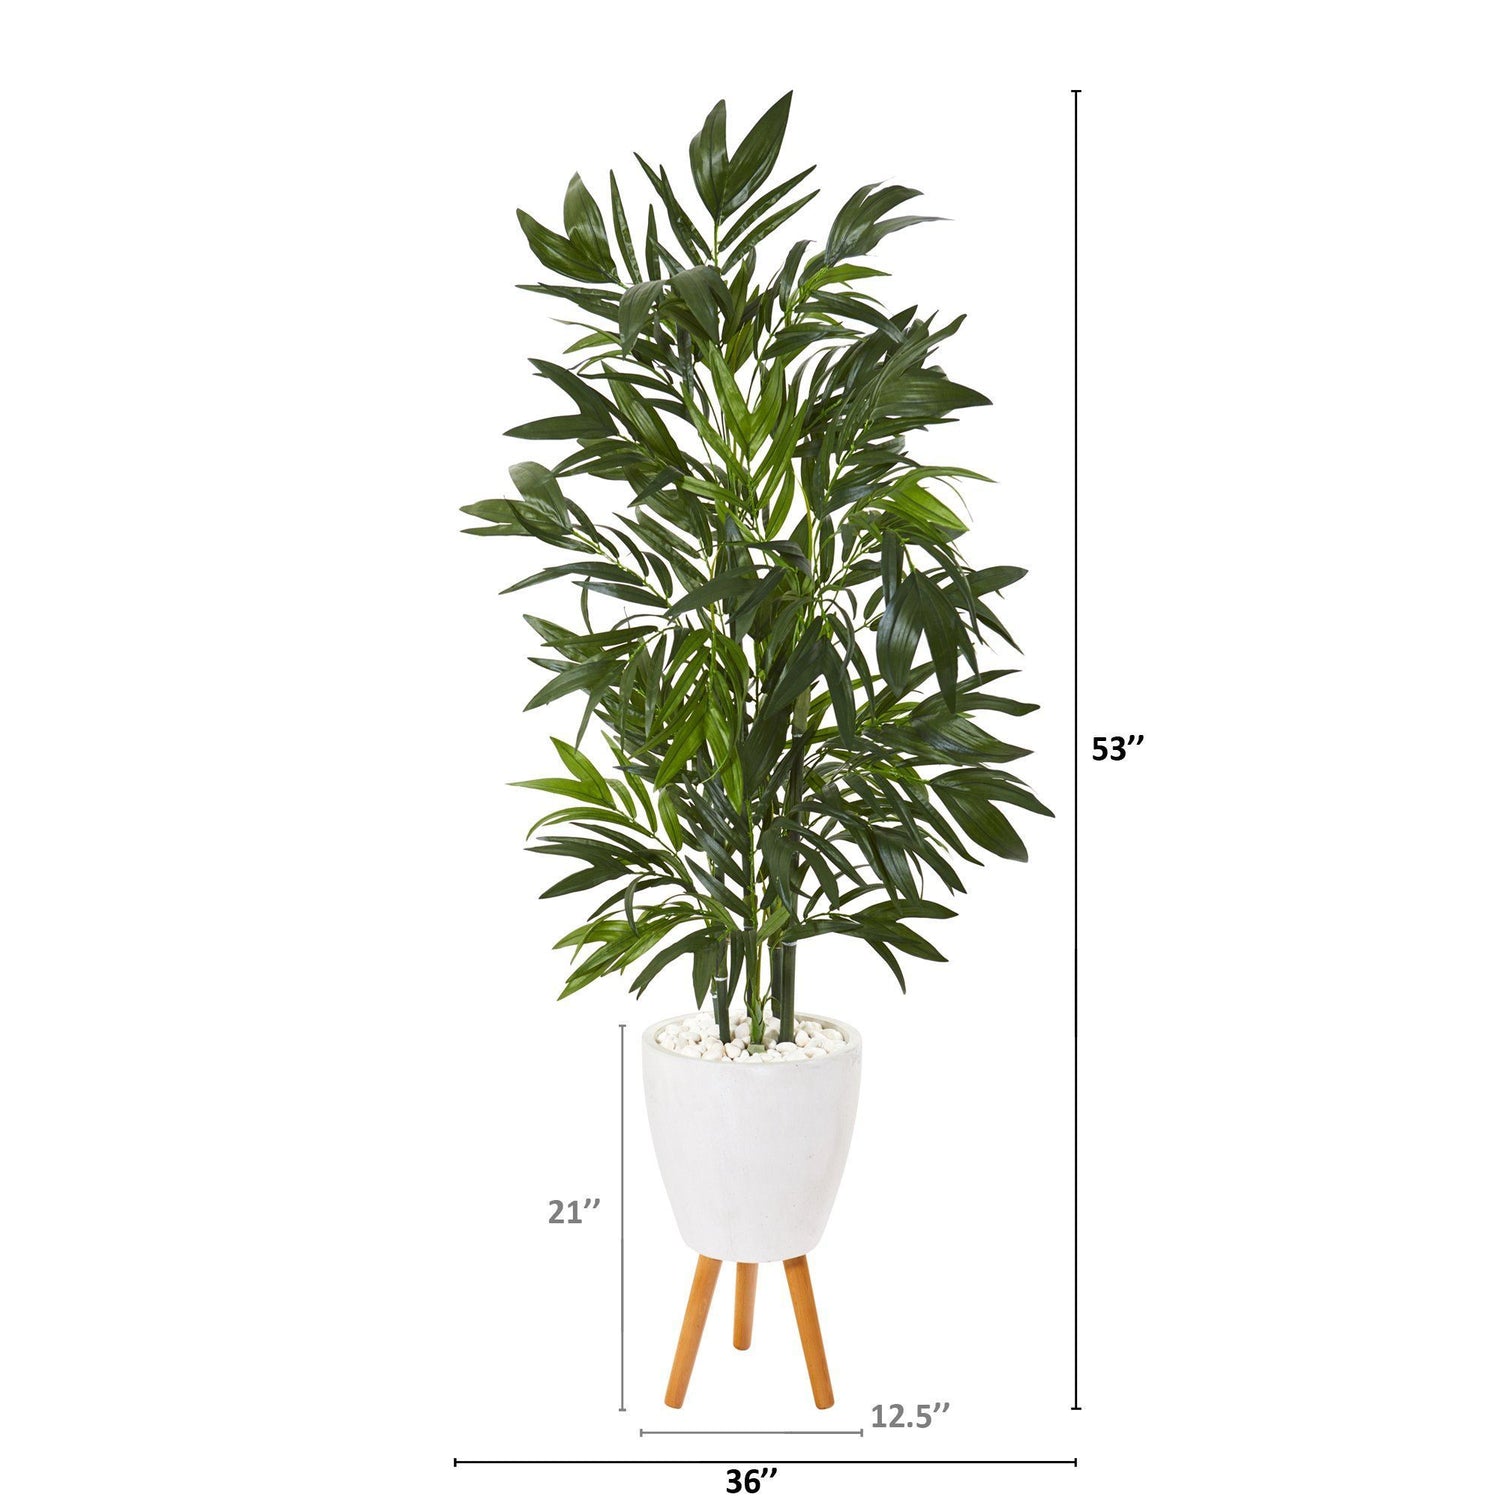 53” Bamboo Palm Artificial Tree in White Planter with Stand